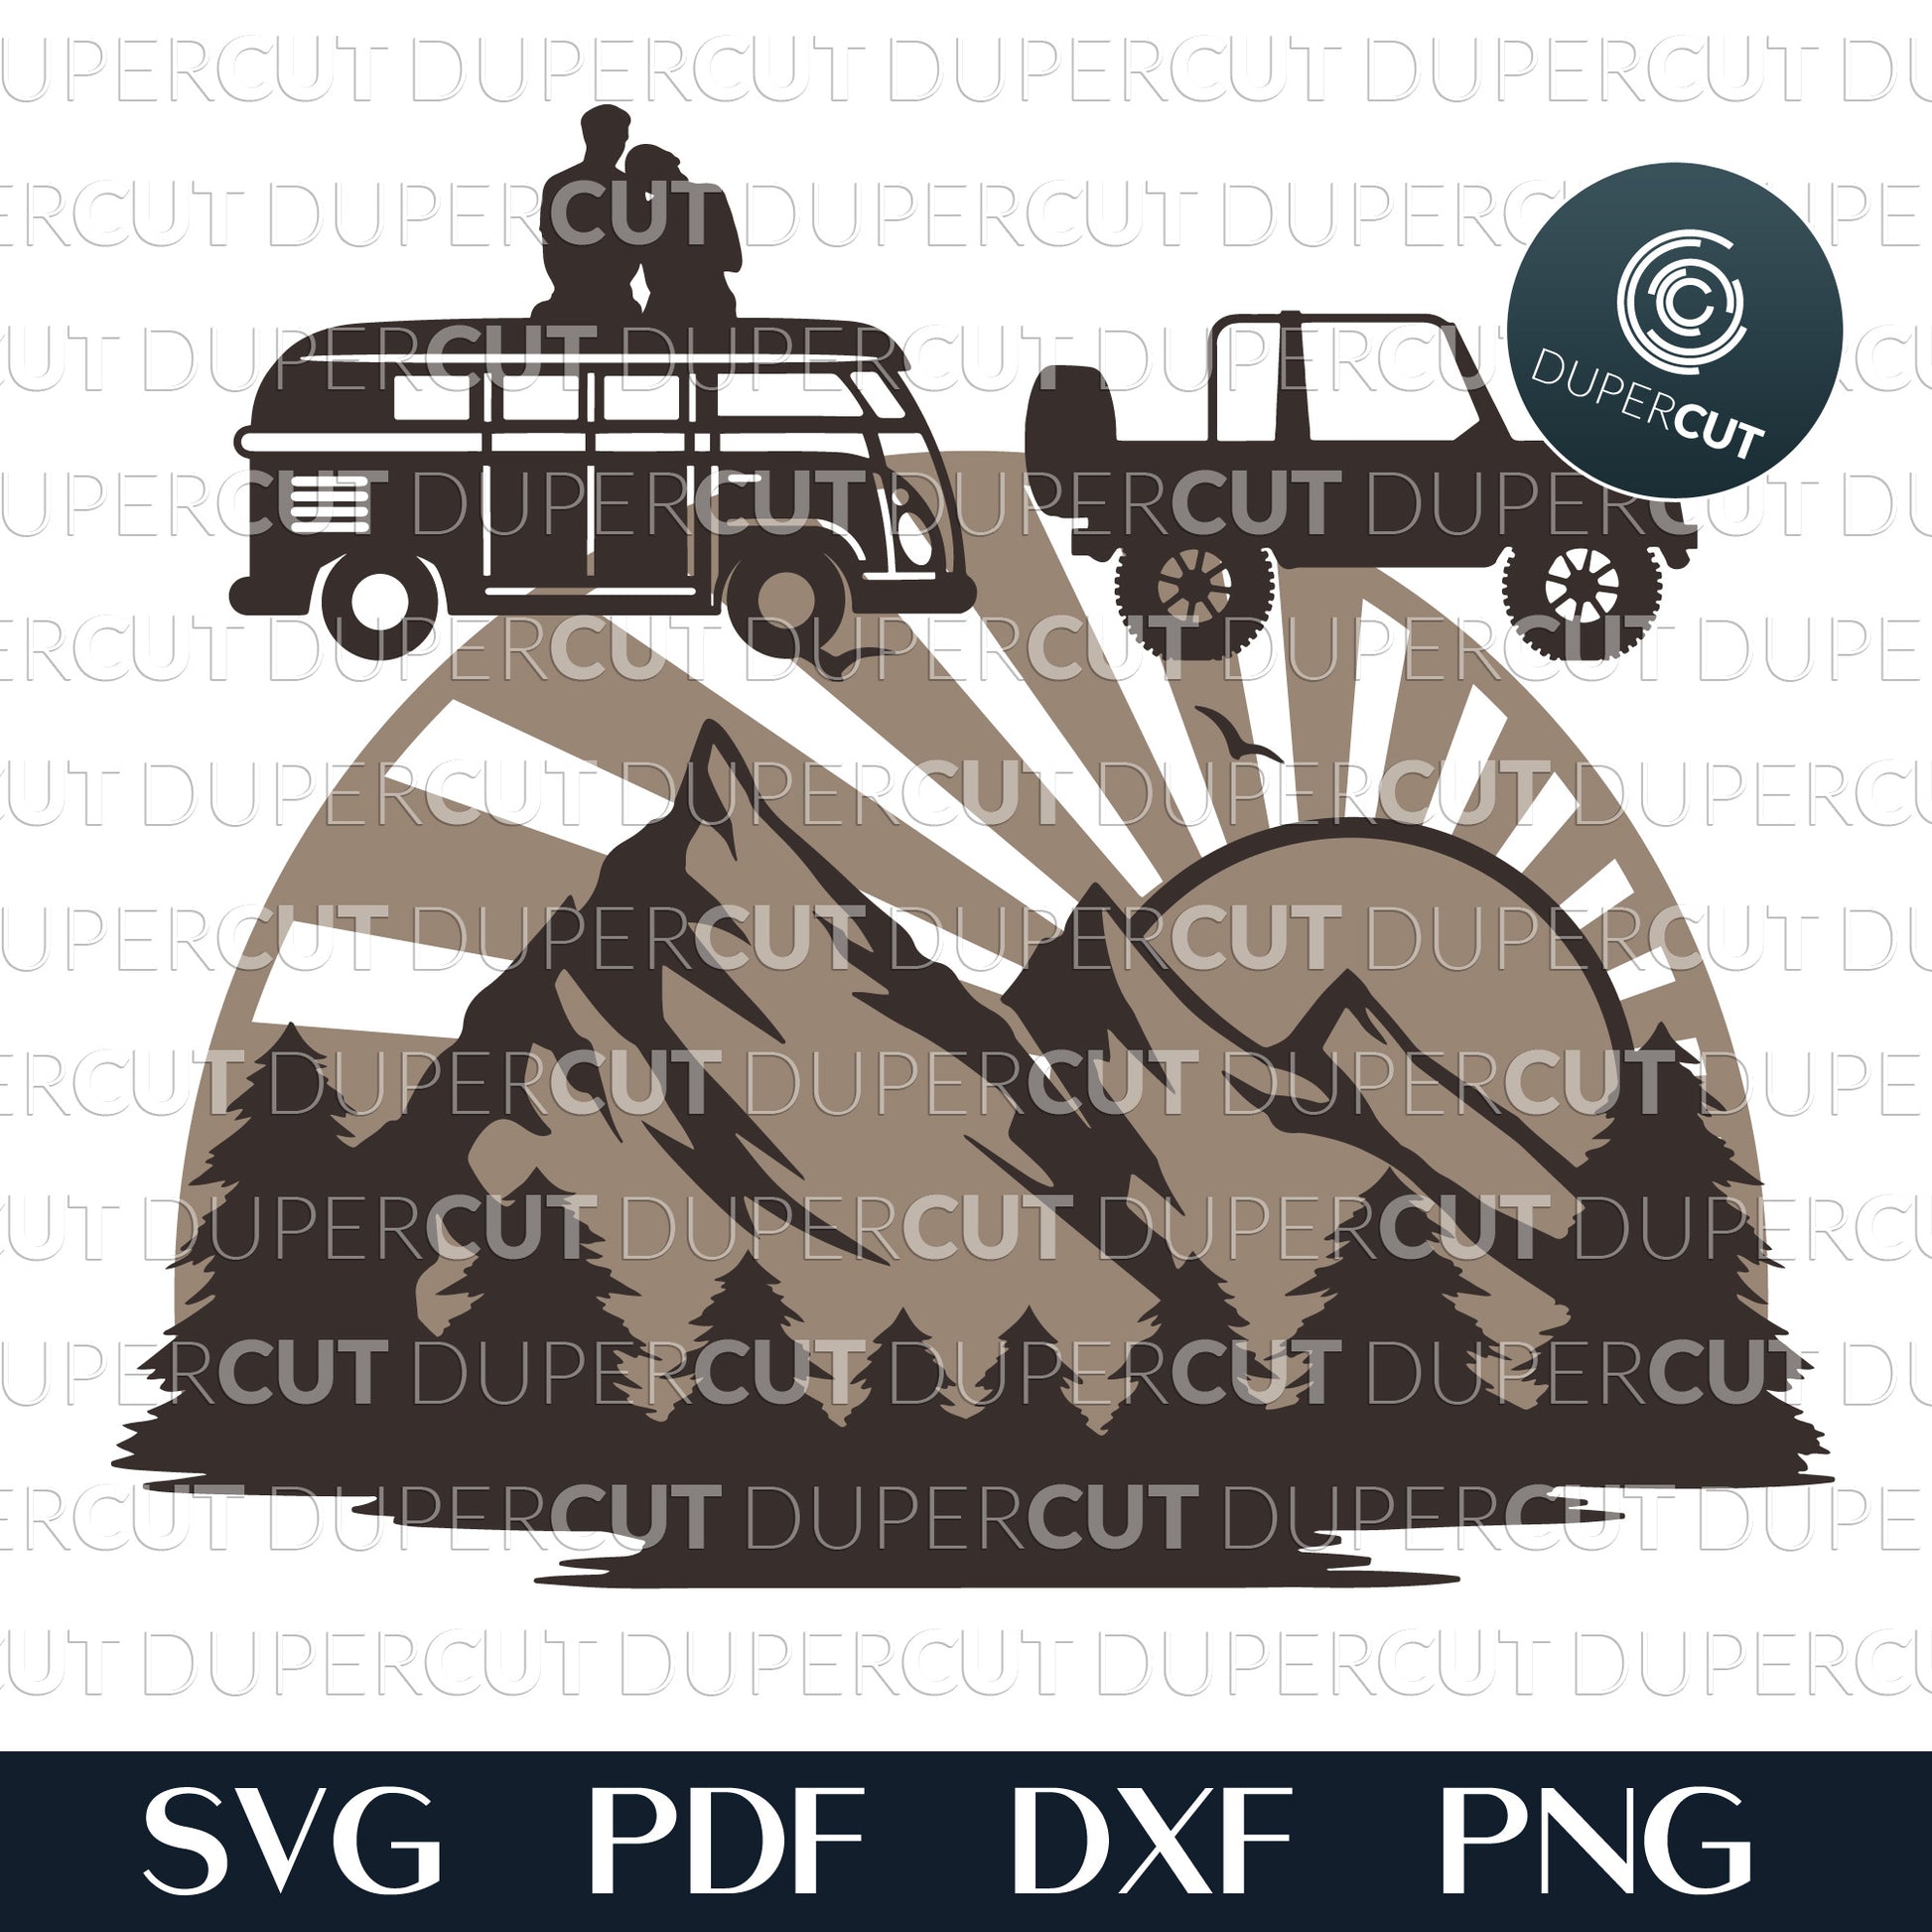 The Adventure Fund DIGITAL DOWNLOAD, cutting file, vinyl file (svg, dxf,  eps, png, jpg included)